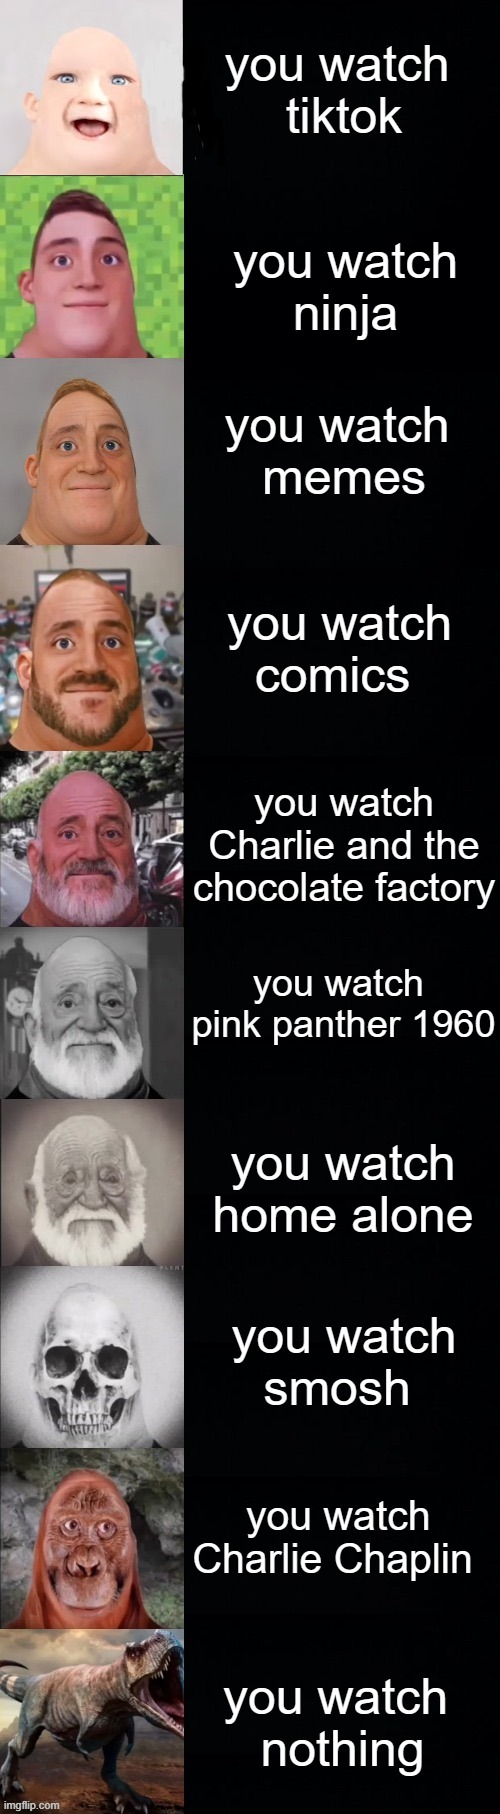 its just a meme ok? | you watch 
tiktok; you watch
 ninja; you watch 
memes; you watch
comics; you watch
Charlie and the chocolate factory; you watch 
pink panther 1960; you watch home alone; you watch
smosh; you watch 
Charlie Chaplin; you watch 
nothing | image tagged in mr incredible becoming old,meme,fun,old,mr incredible,do people read this | made w/ Imgflip meme maker